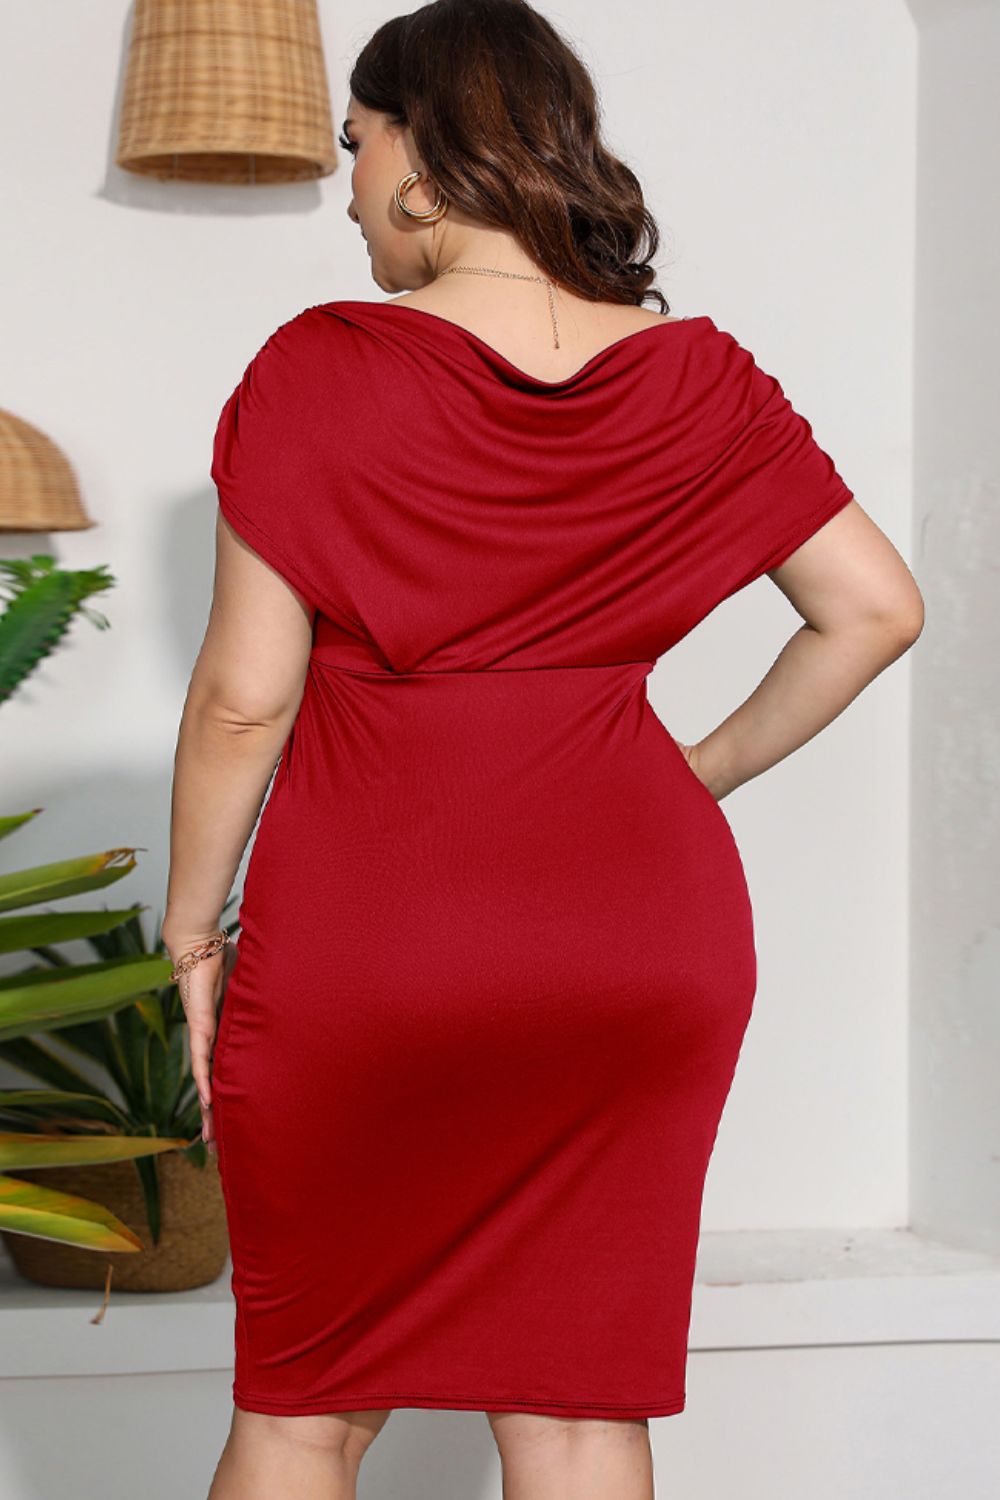 Elegant Plus Size Beach Wedding Guest Dress with Ruched V-Neck - Perfect for Any Summer Occasion